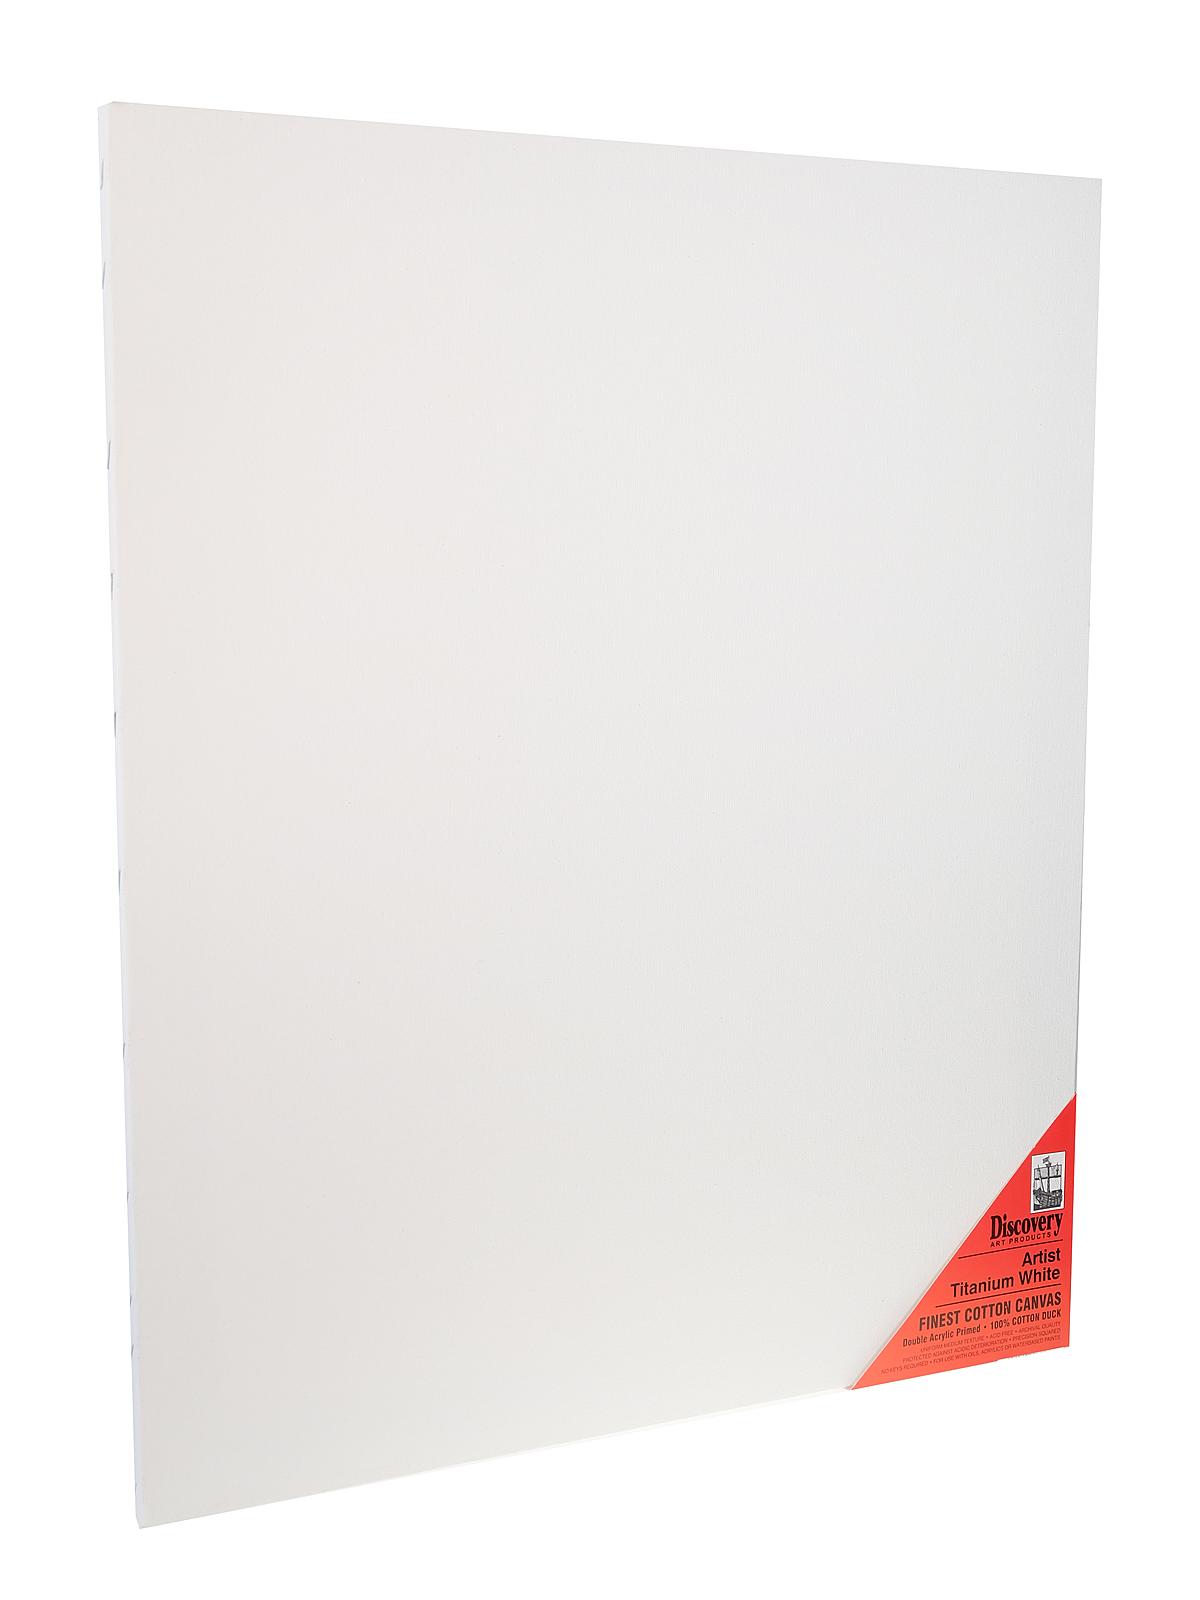 Finest Stretched Cotton Canvas White 20 In. X 24 In. Each